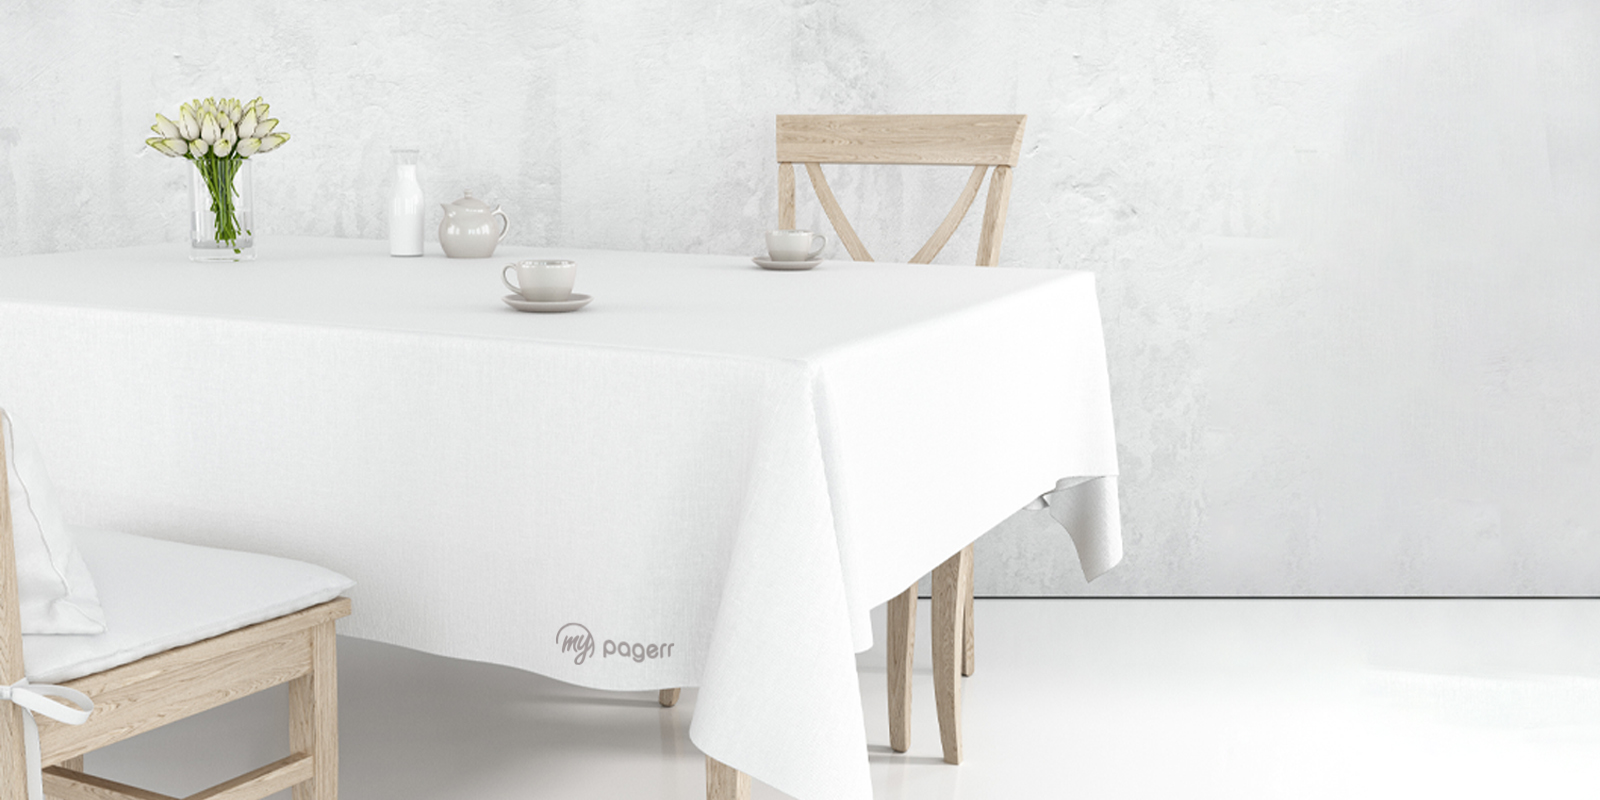 Tablecloths in Madrid - Print with Pagerr